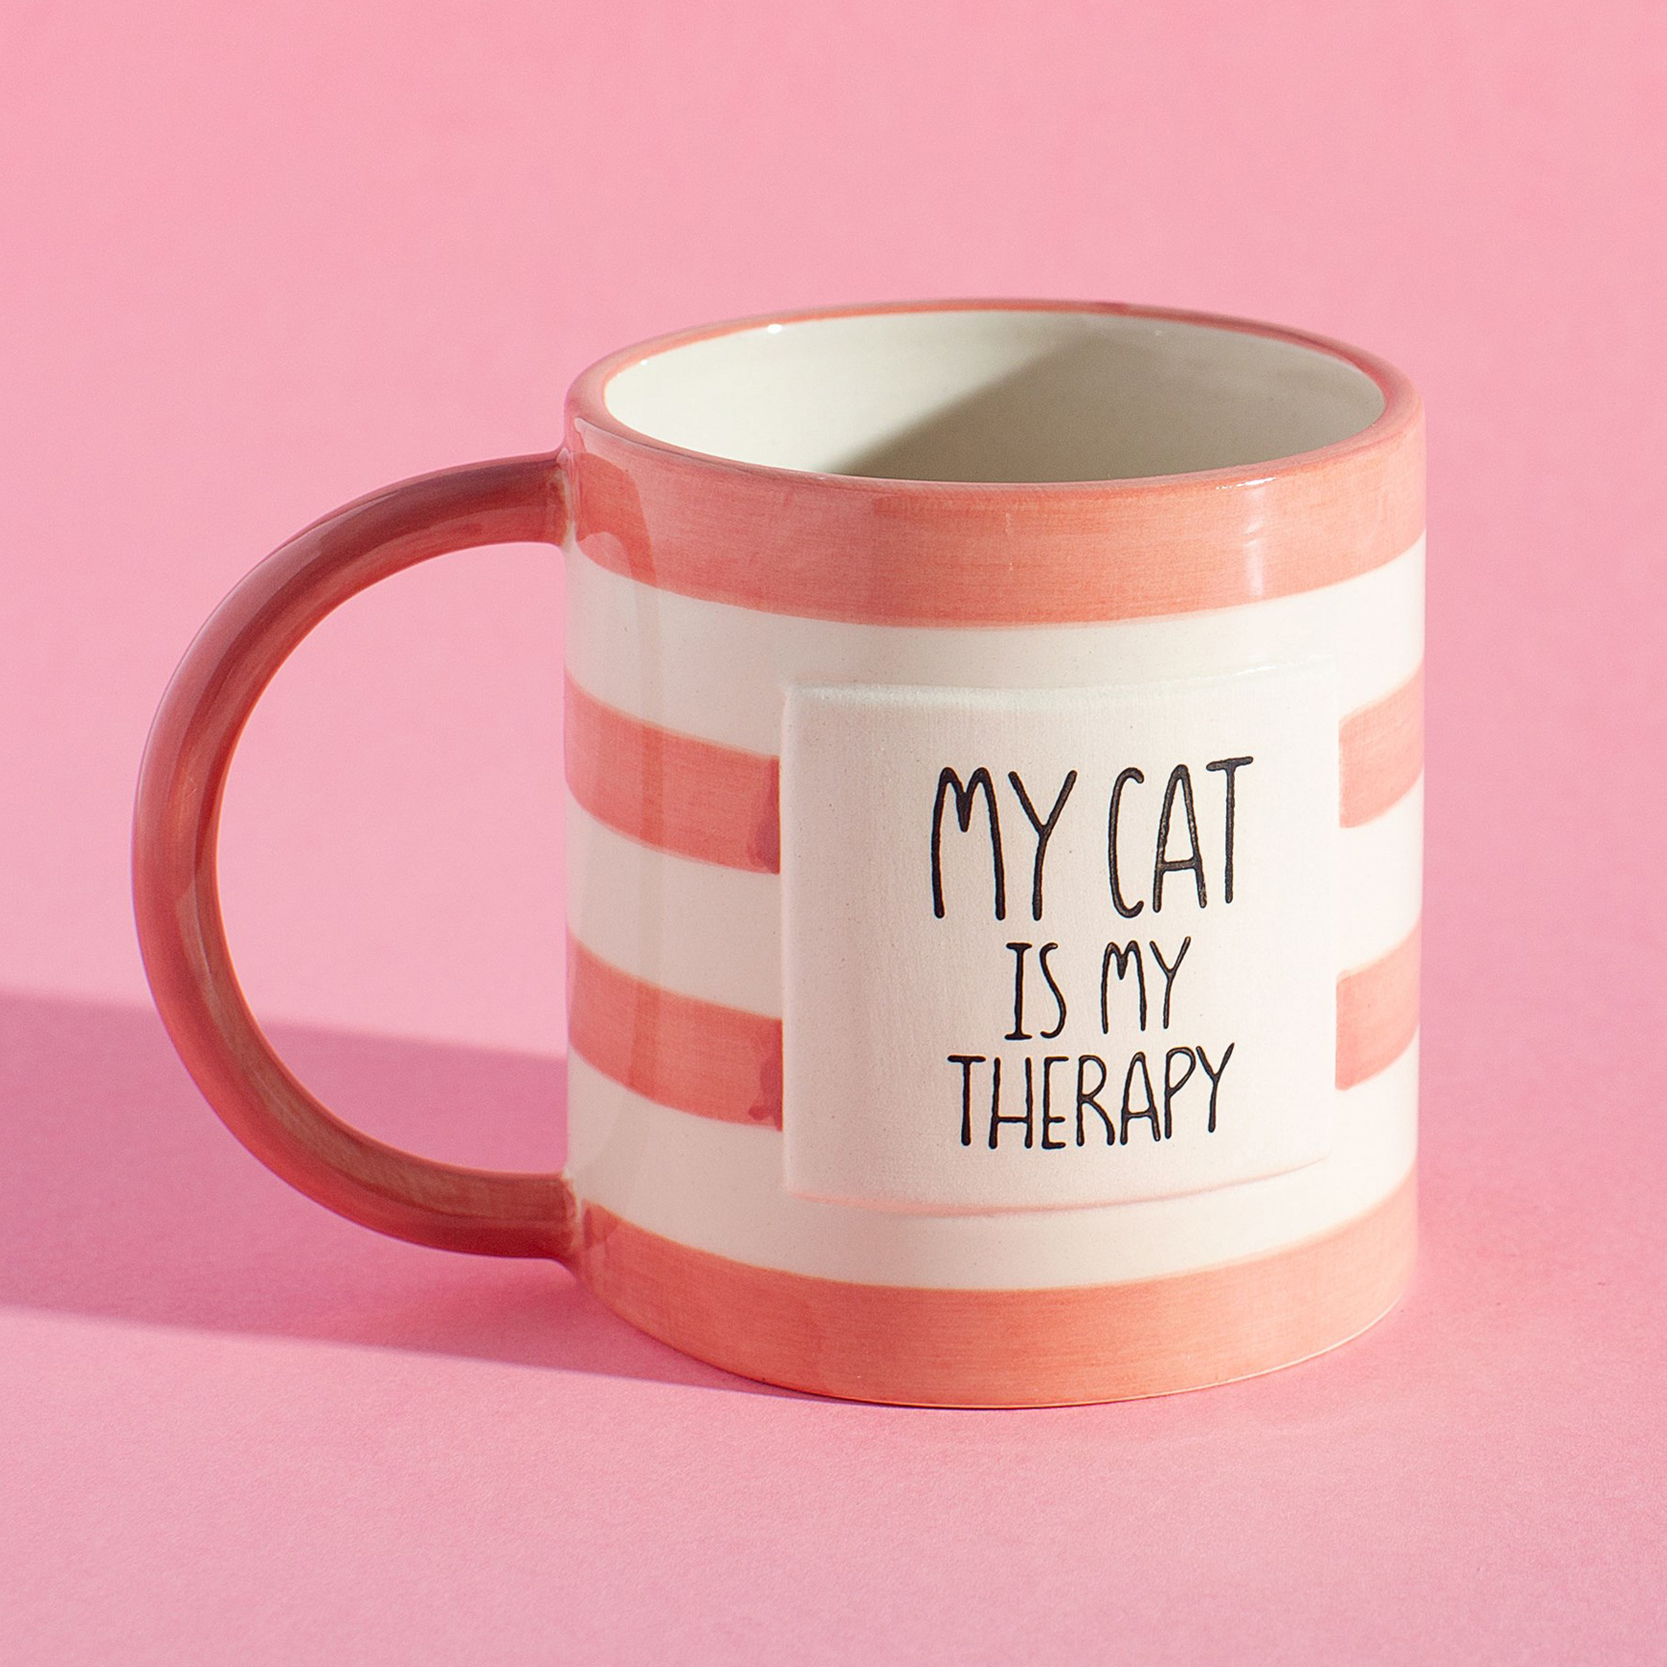 Mugg "Cat Therapy"